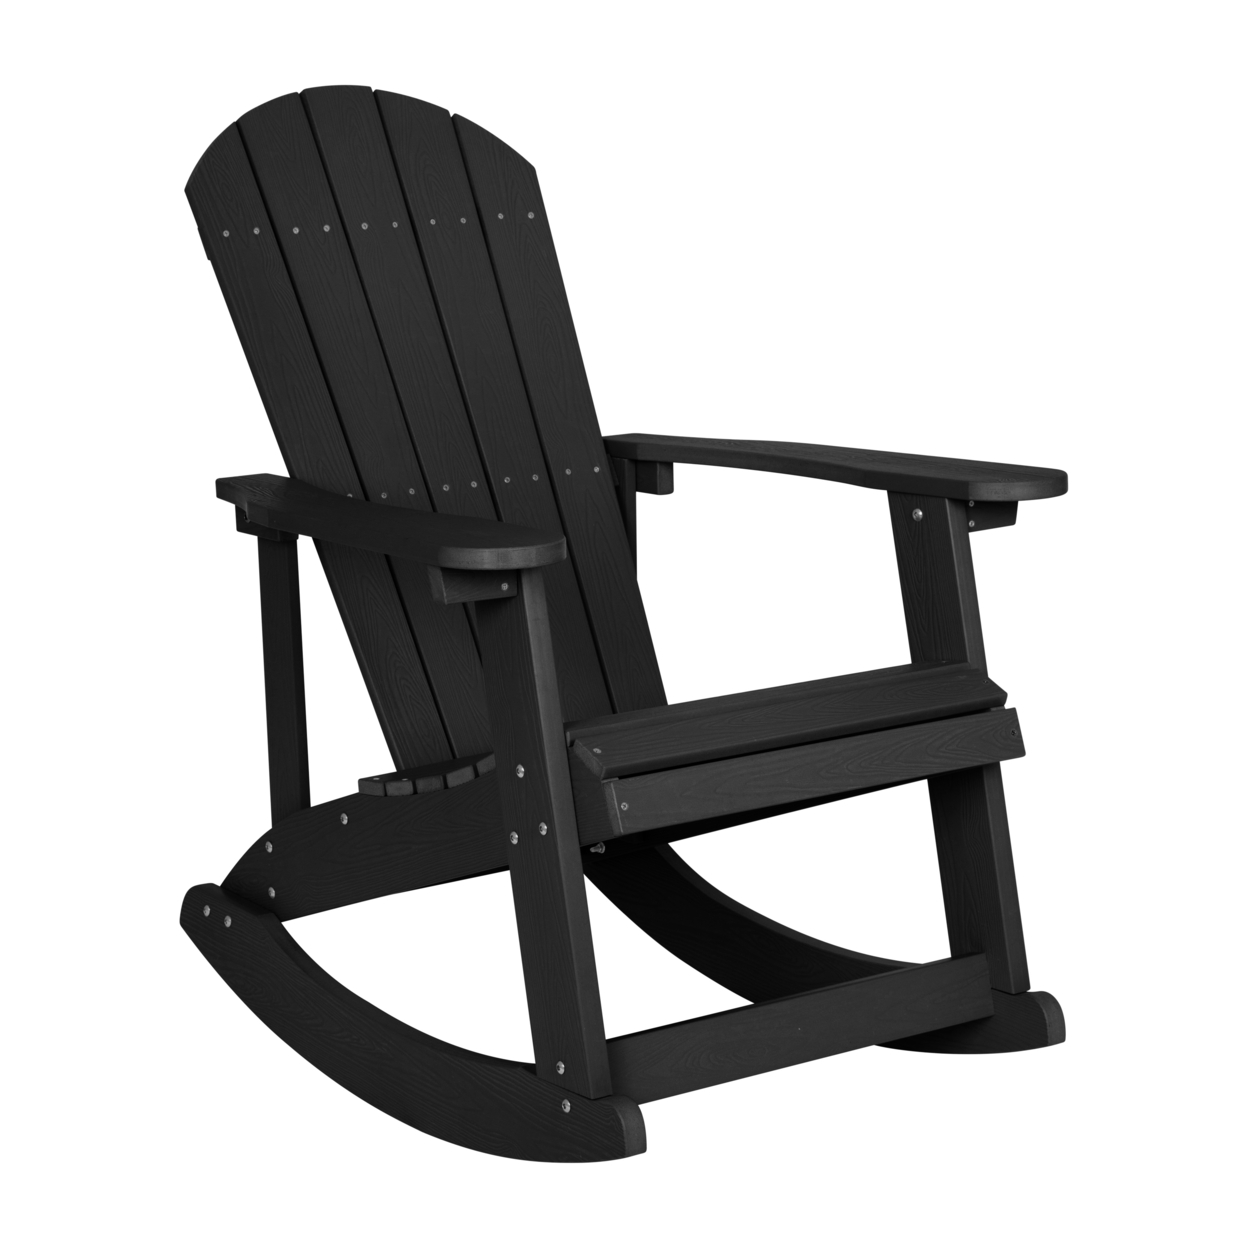 Savannah All-Weather Poly Resin Wood Adirondack Rocking Chair With Rust Resistant Stainless Steel Hardware In Black